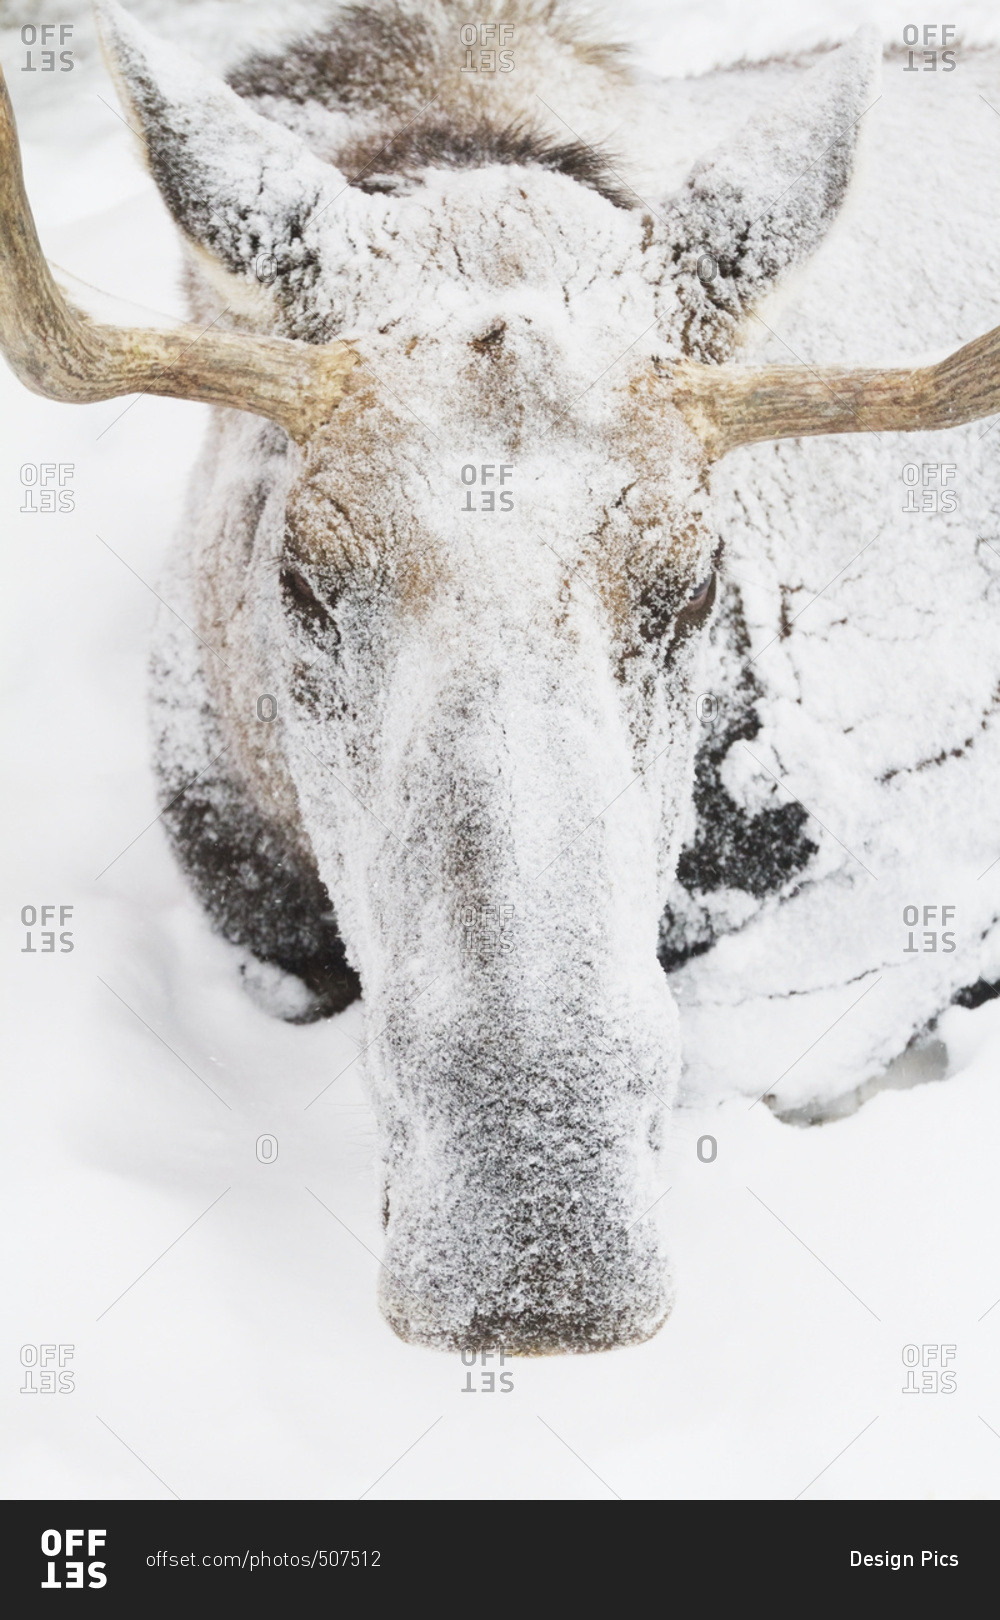 Captive bull moose (alces alces) covered in snow at the Alaska Wildlife Conservation Center in winter; Portage, Alaska, United States of America